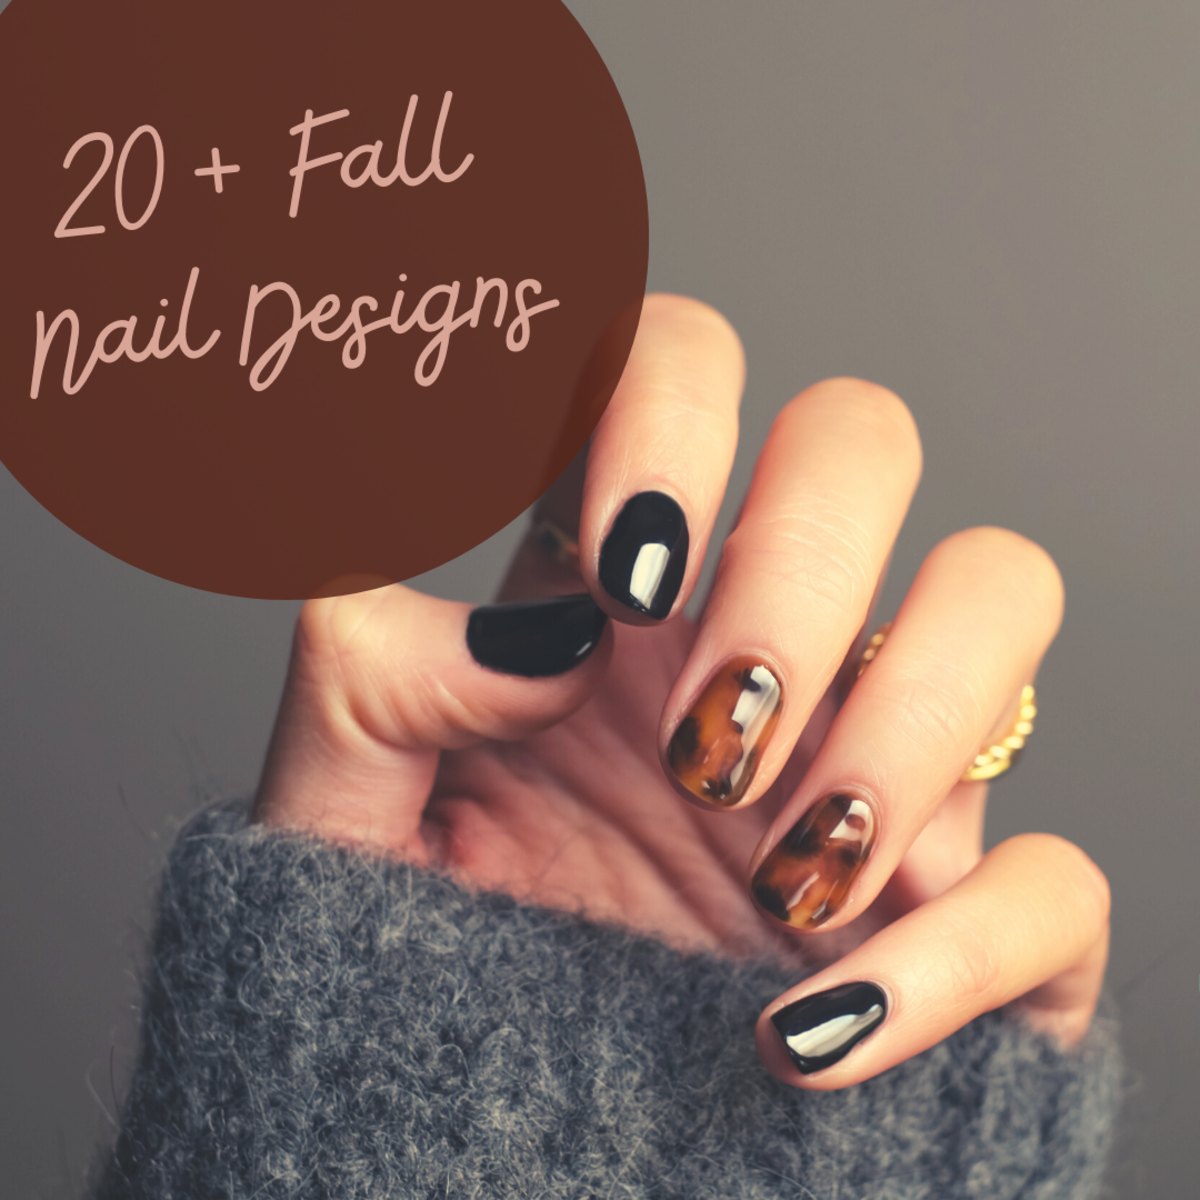 Discover a variety of ways to decorate your nails this fall!